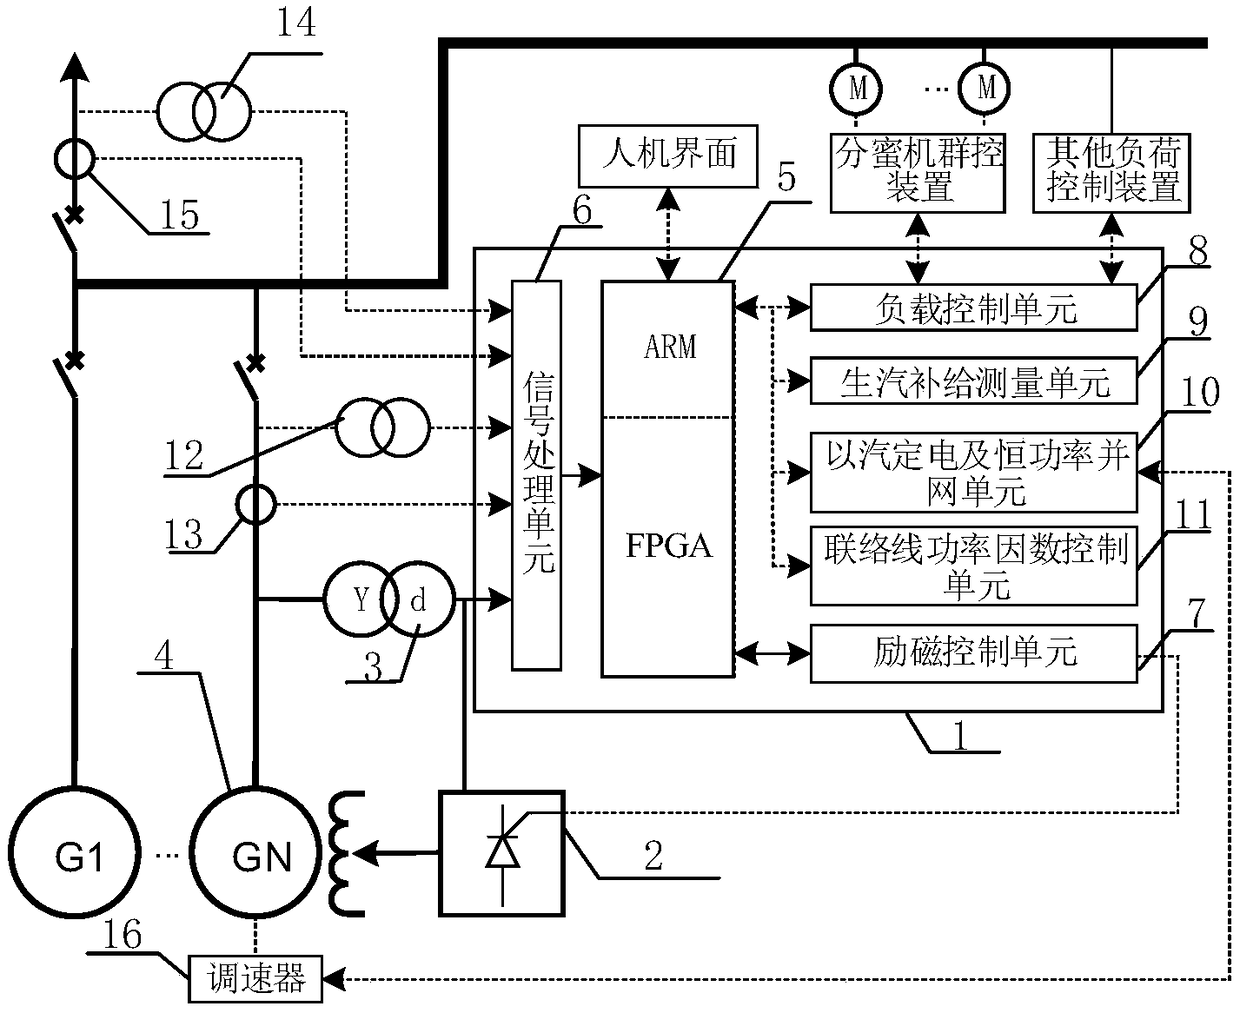 Excitation control system applicable to steam turbine generator unit of self-generation power plant